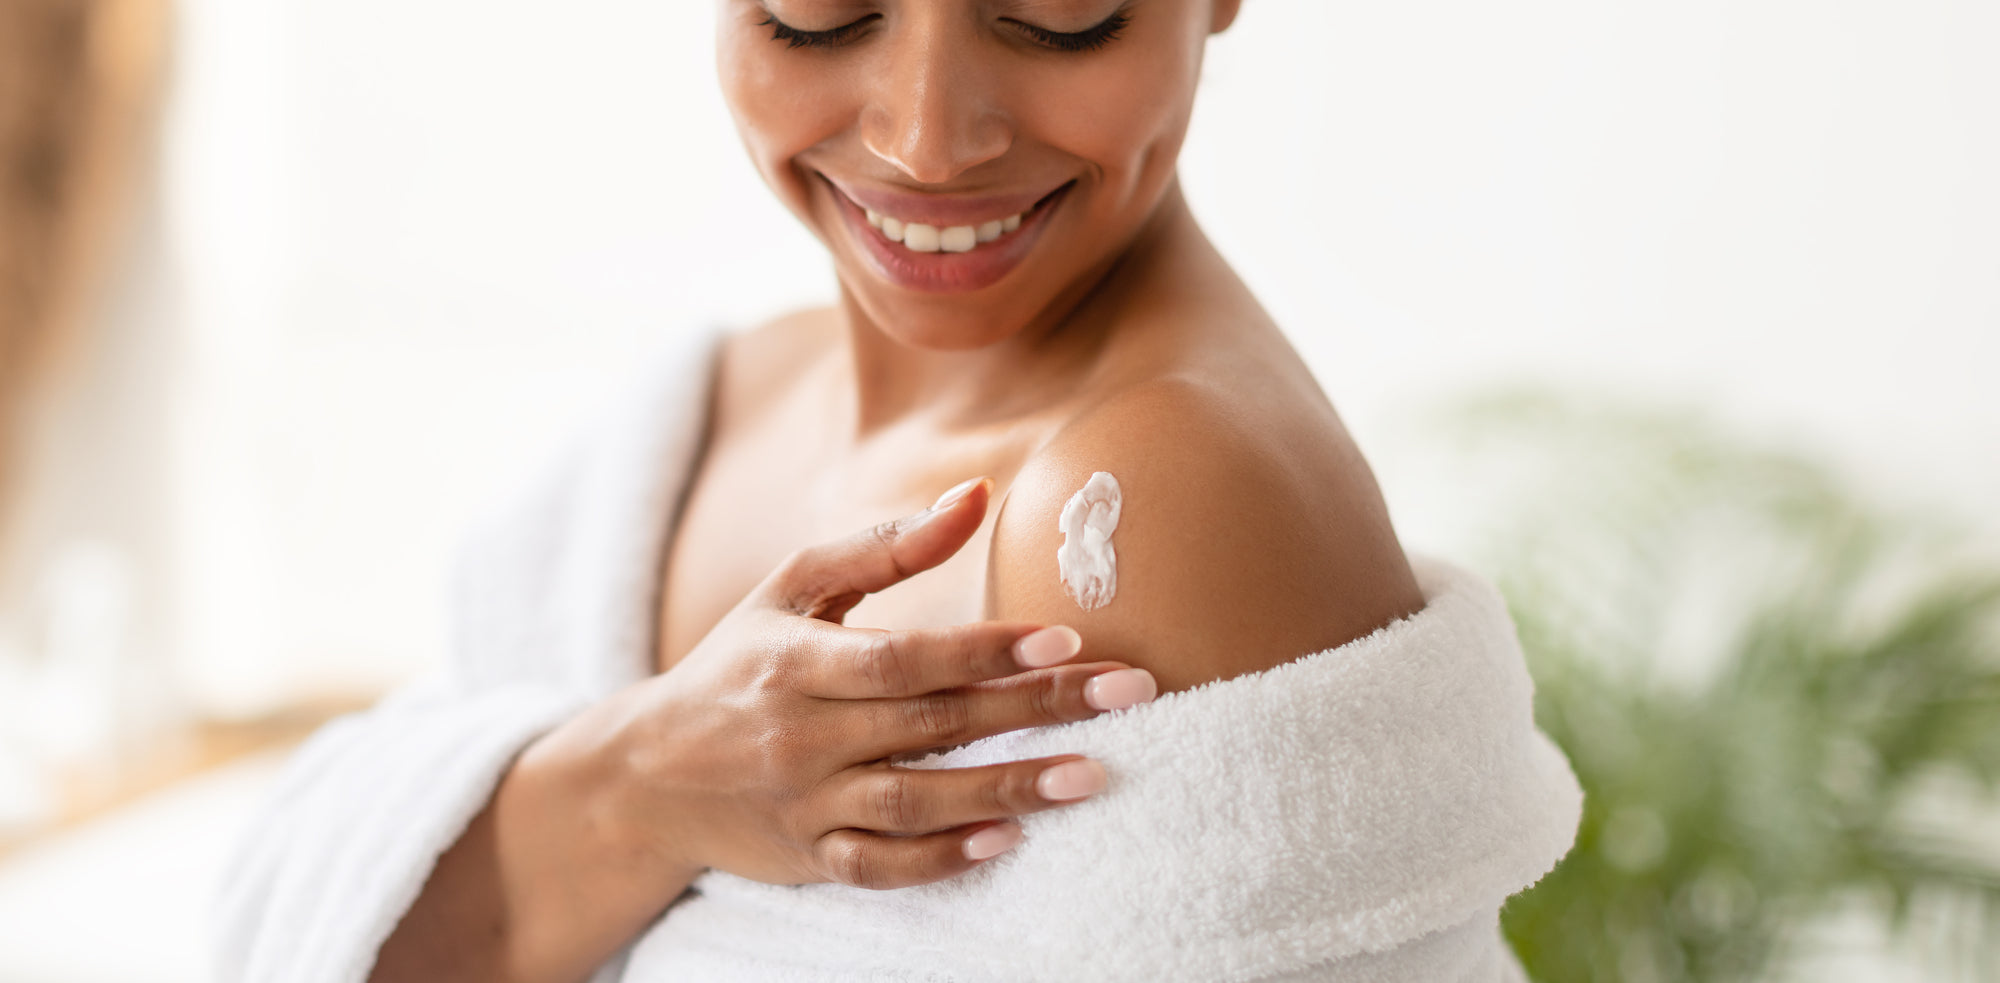 Body Skin Care 101: Your Complete Guide to Nurturing Your Skin